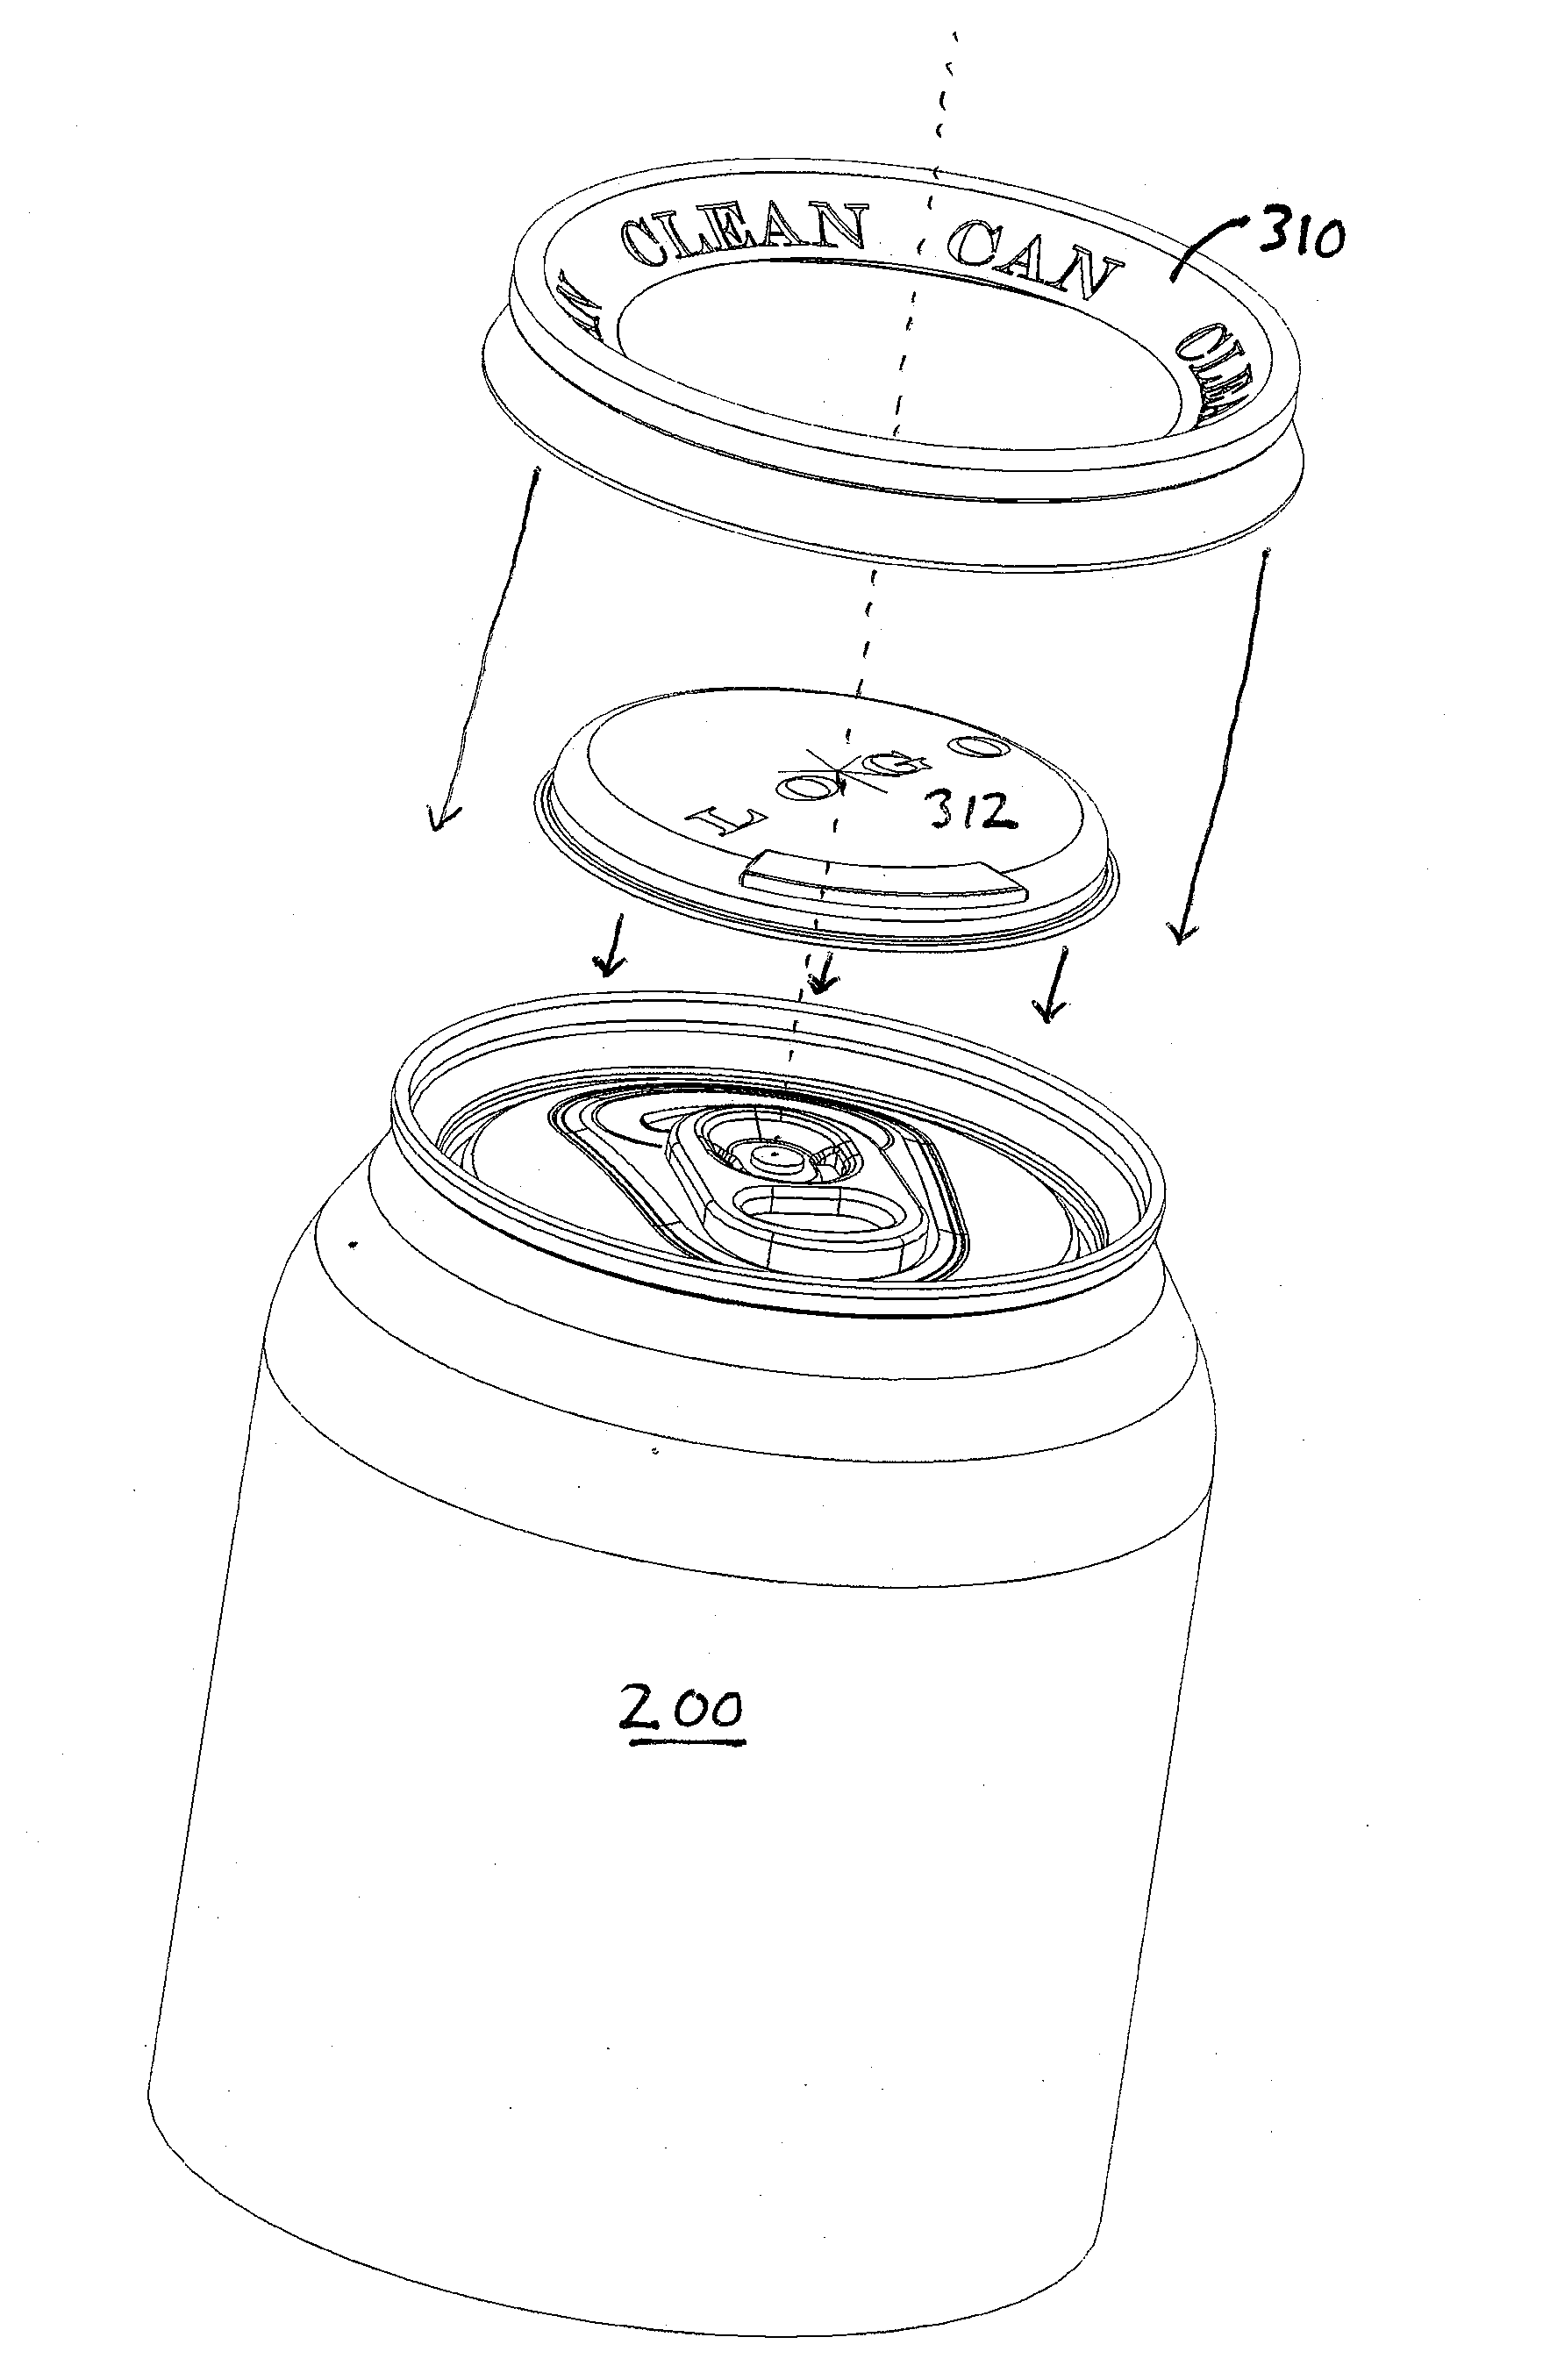 Beverage can marketing device with removable center cover